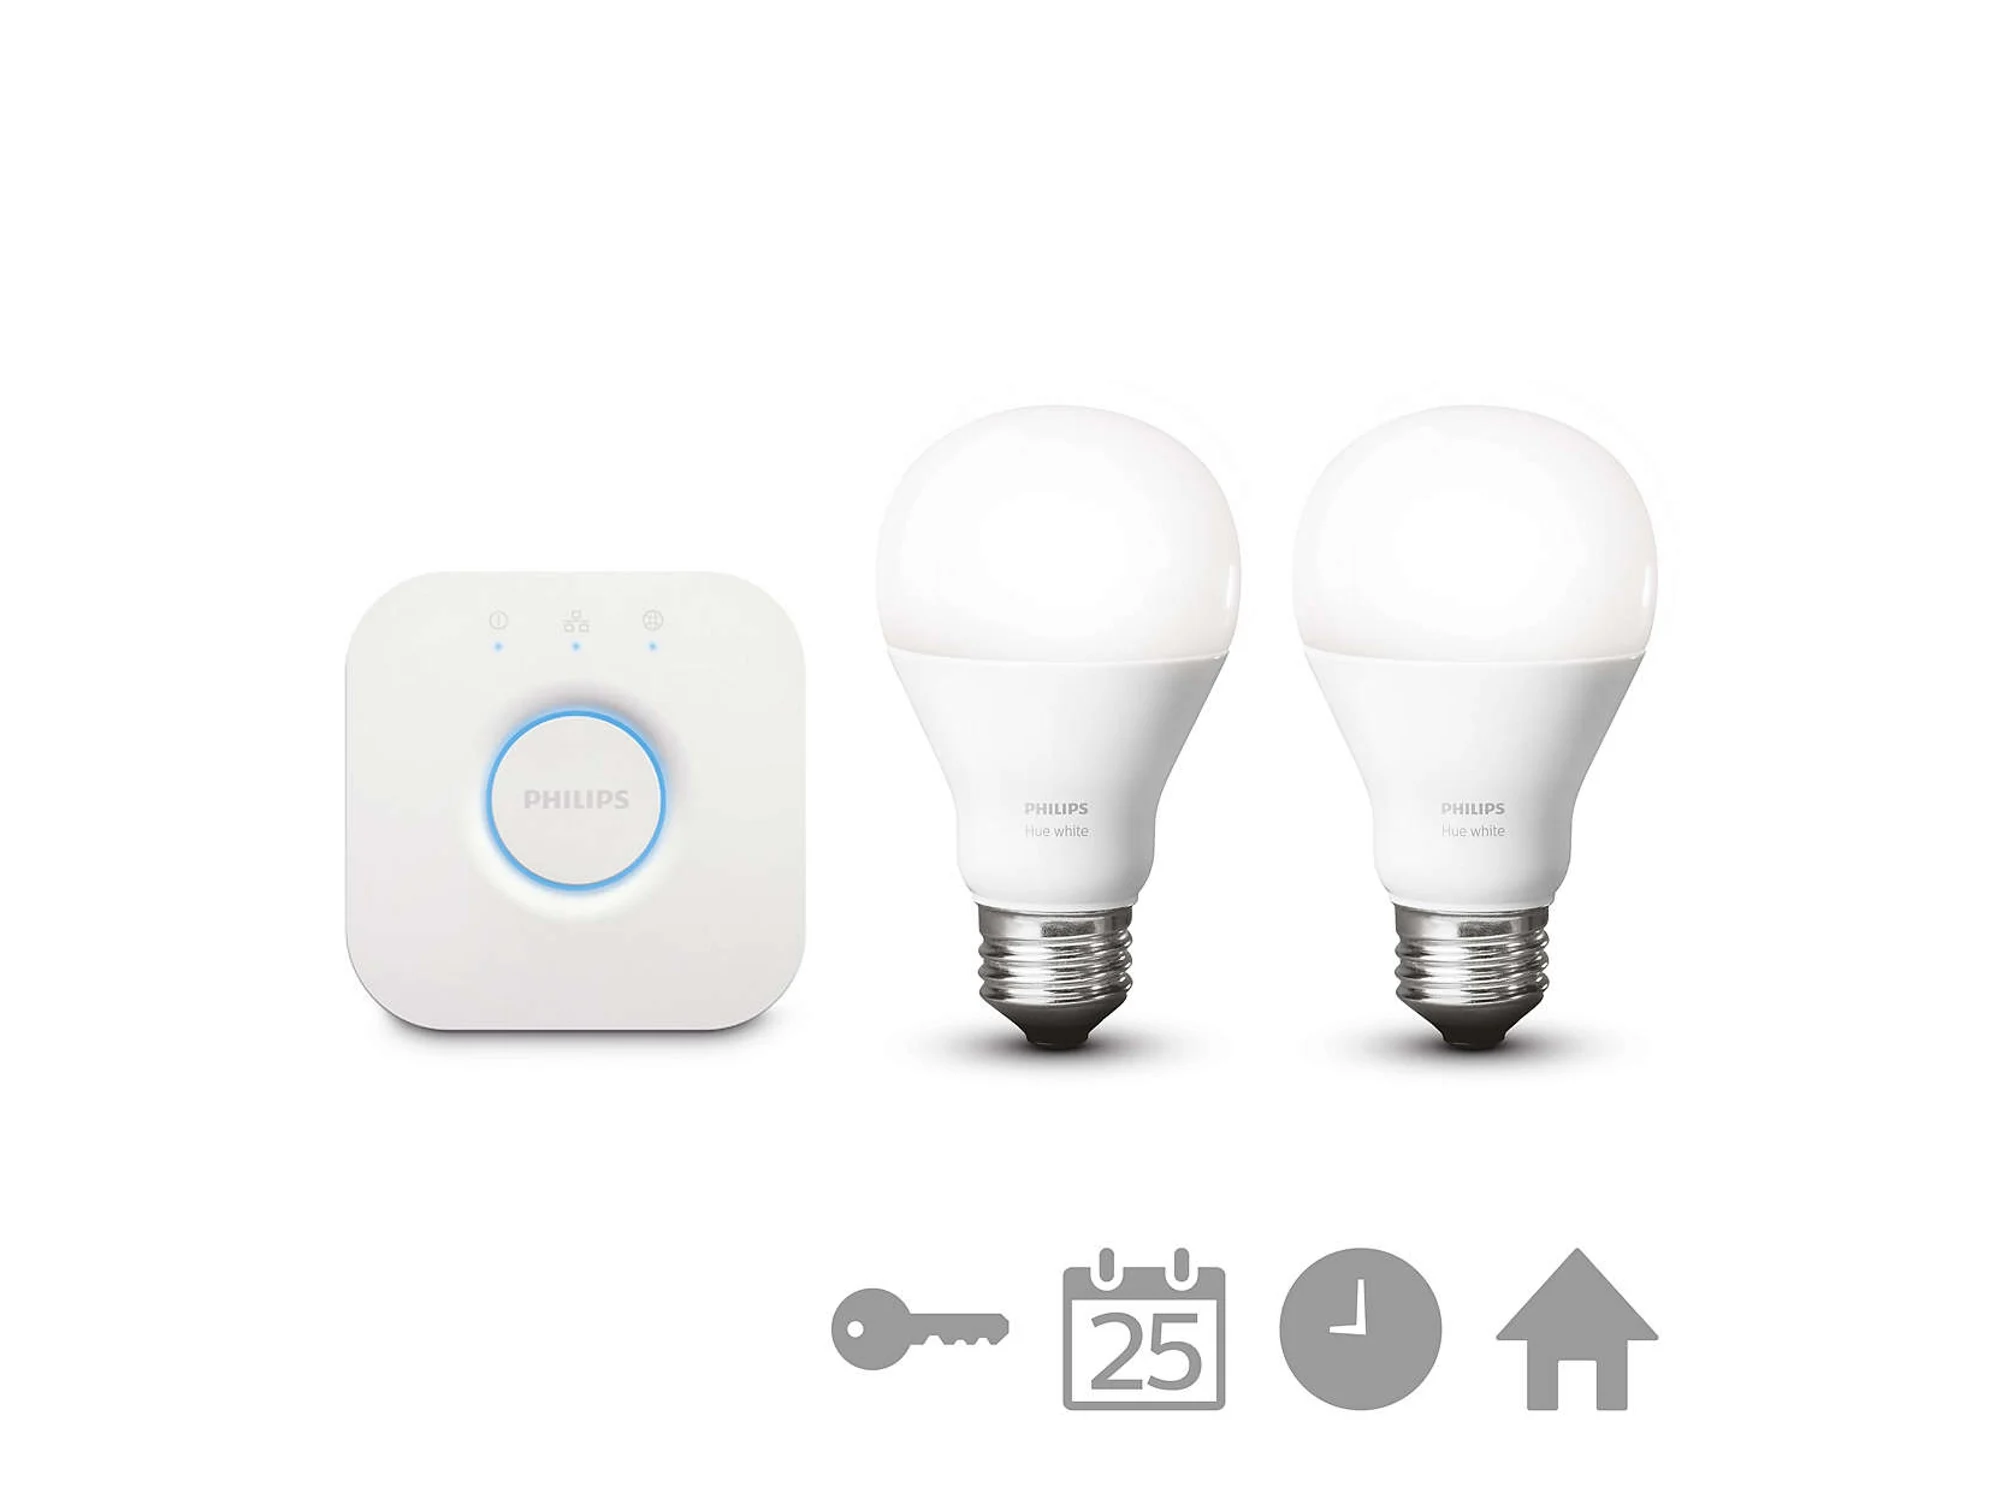 Kit 2 Bombillas Philips Hue A60 E27 - Outlet Exclusivo